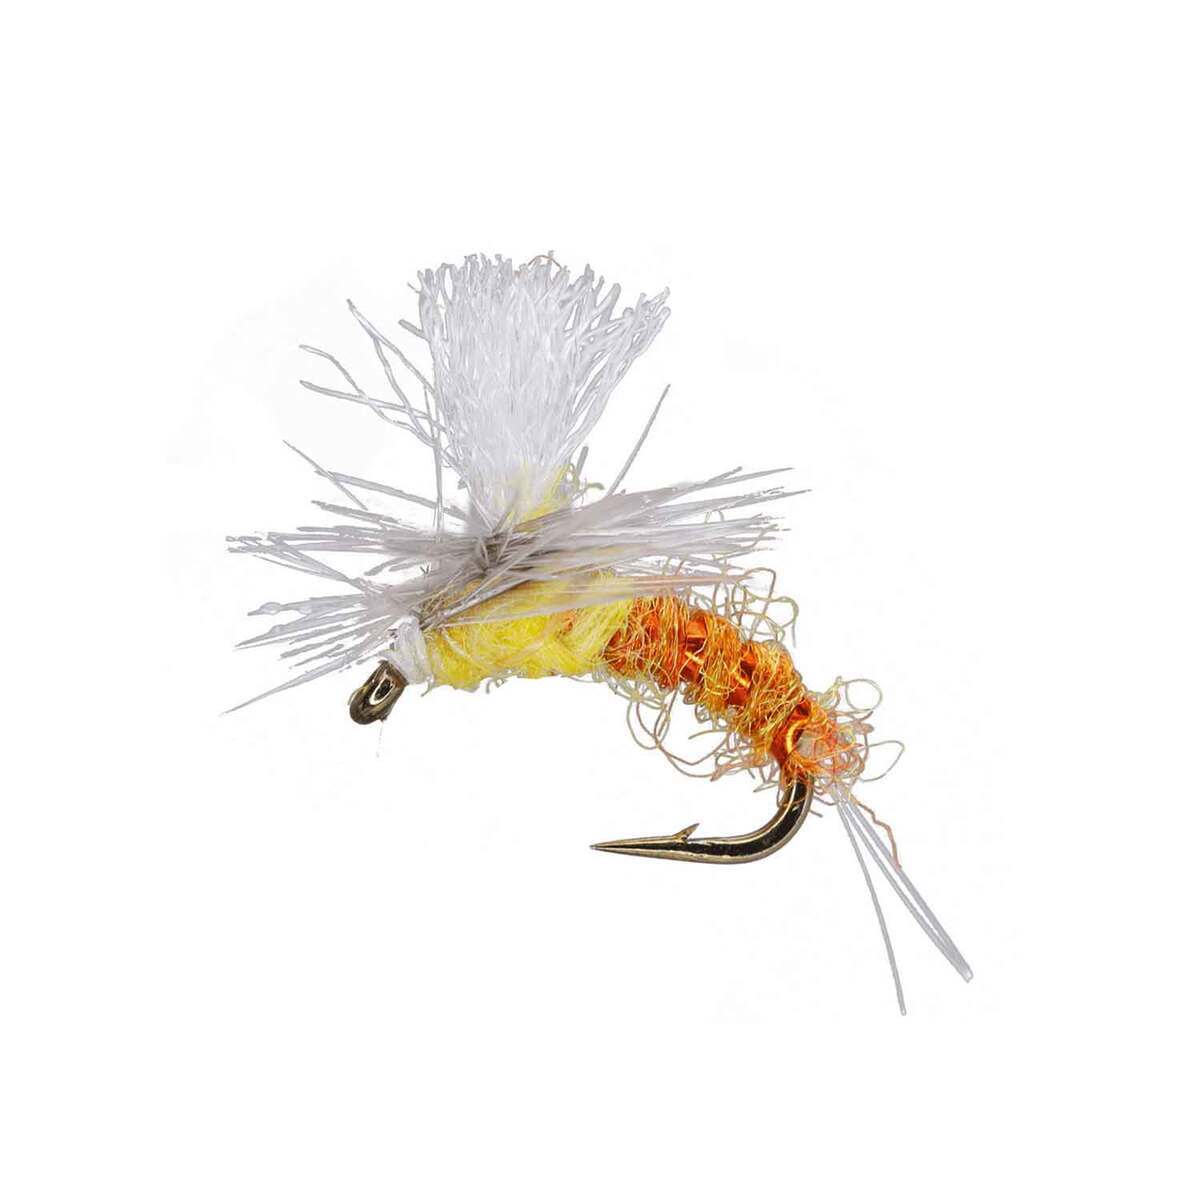 RoundRocks Parachute PMD Emerger Fly - 6 Pack - YellowithOrange/White 16 by Sportsman's Warehouse